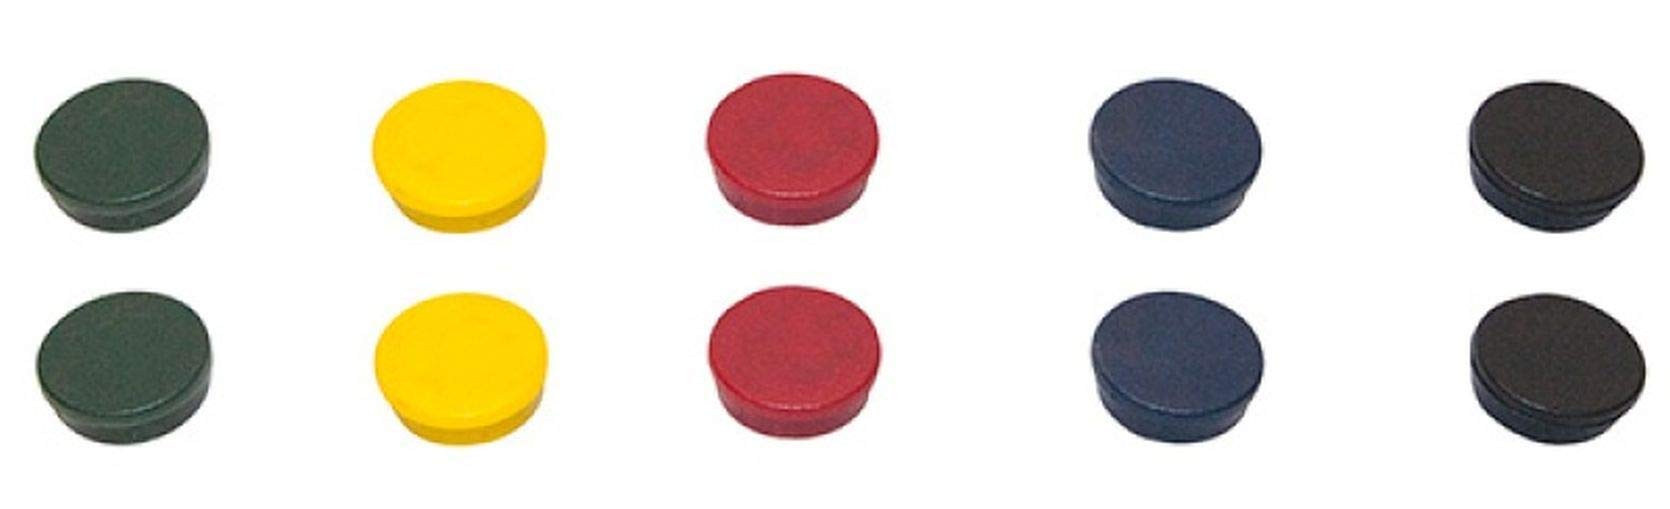 Best Value Bi-Silque Bi-Office 20 mm Round Magnet - Assorted Colours (Pack of 10)